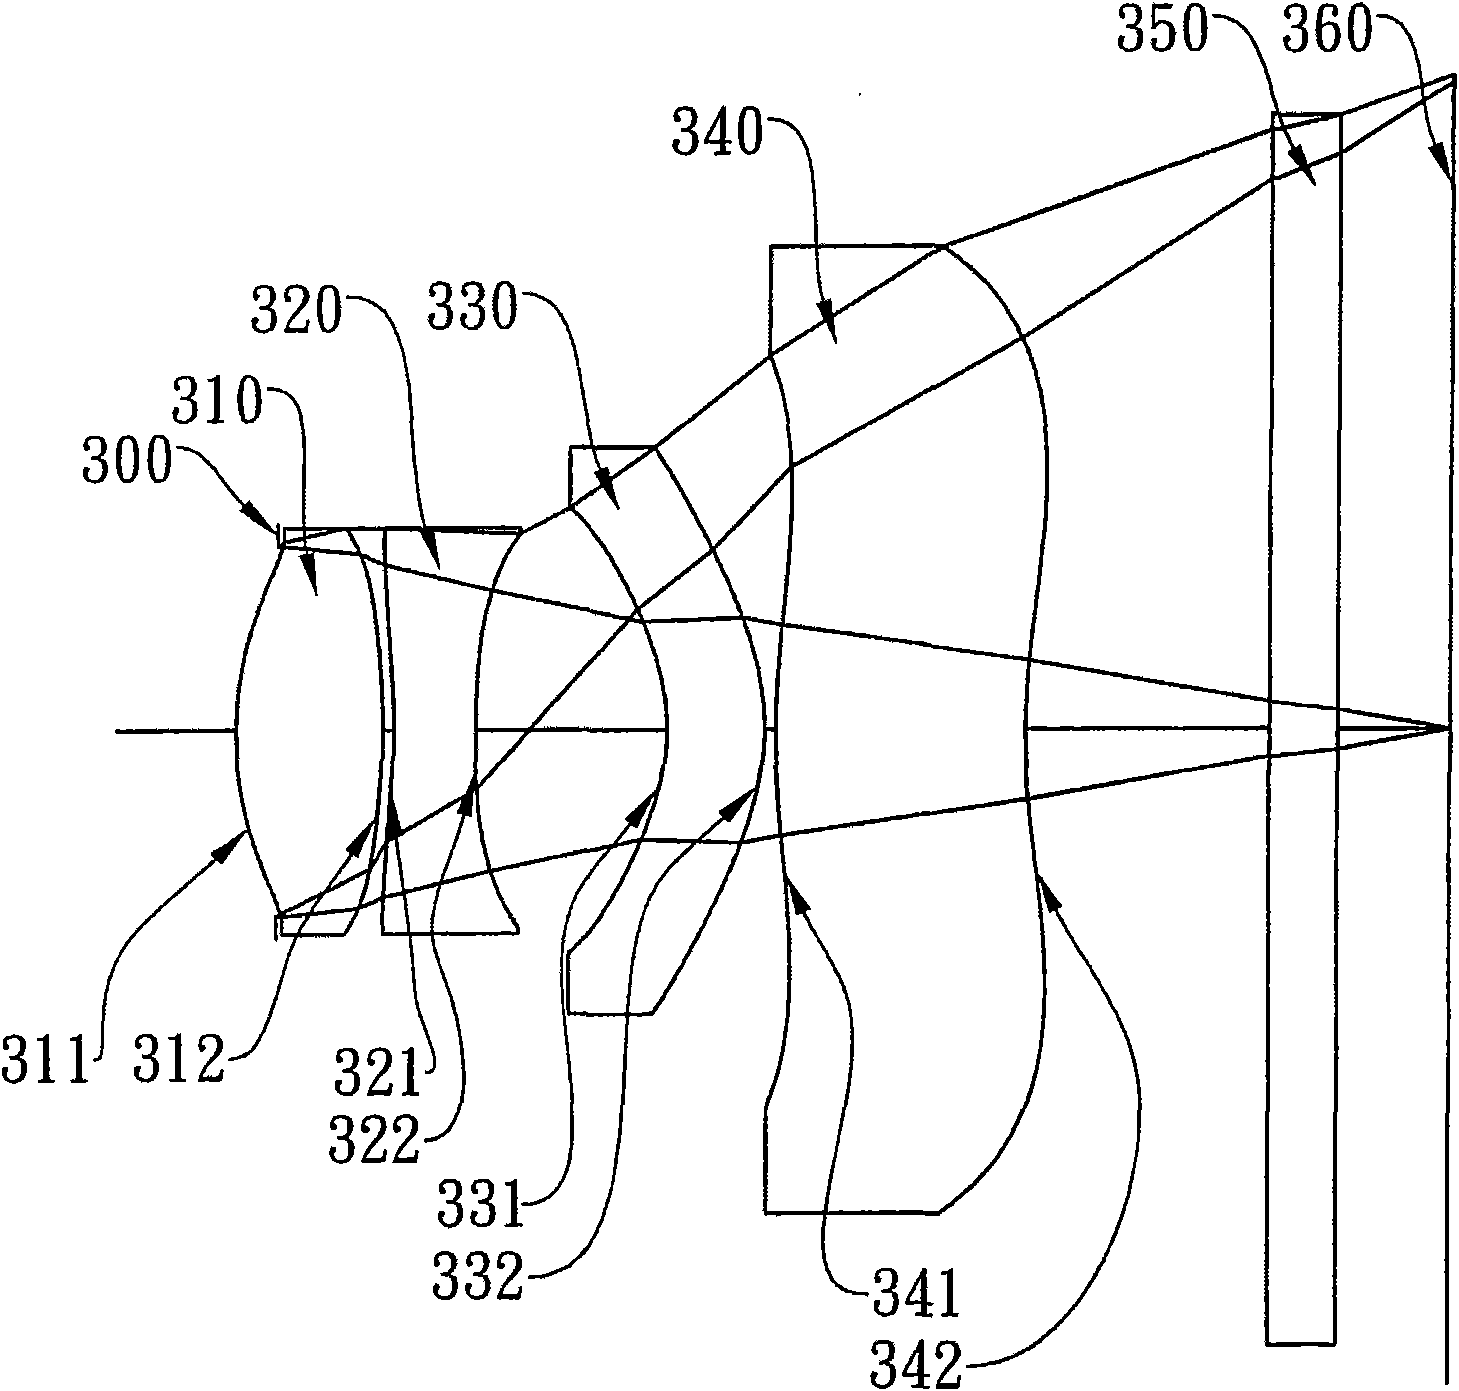 Optical lens group for capturing image